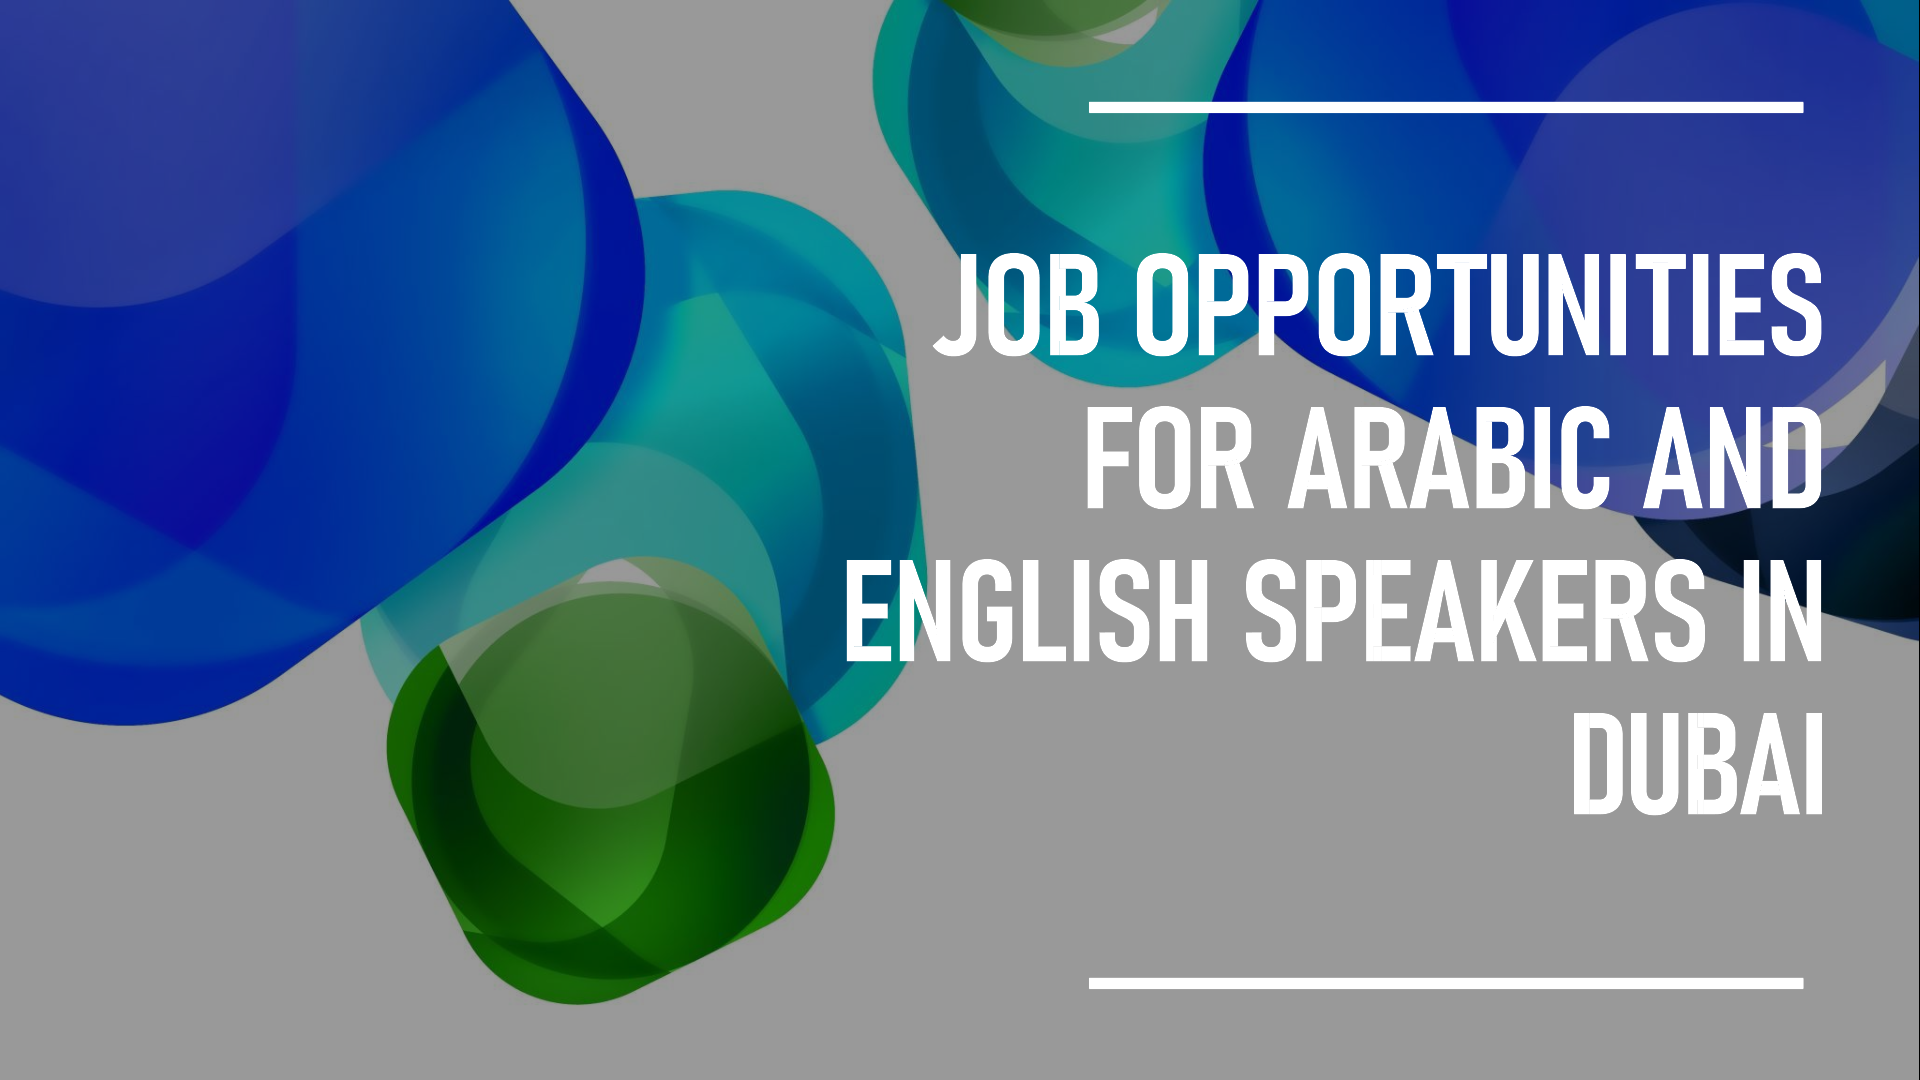 Job opportunities for Arabic and English speakers in Dubai